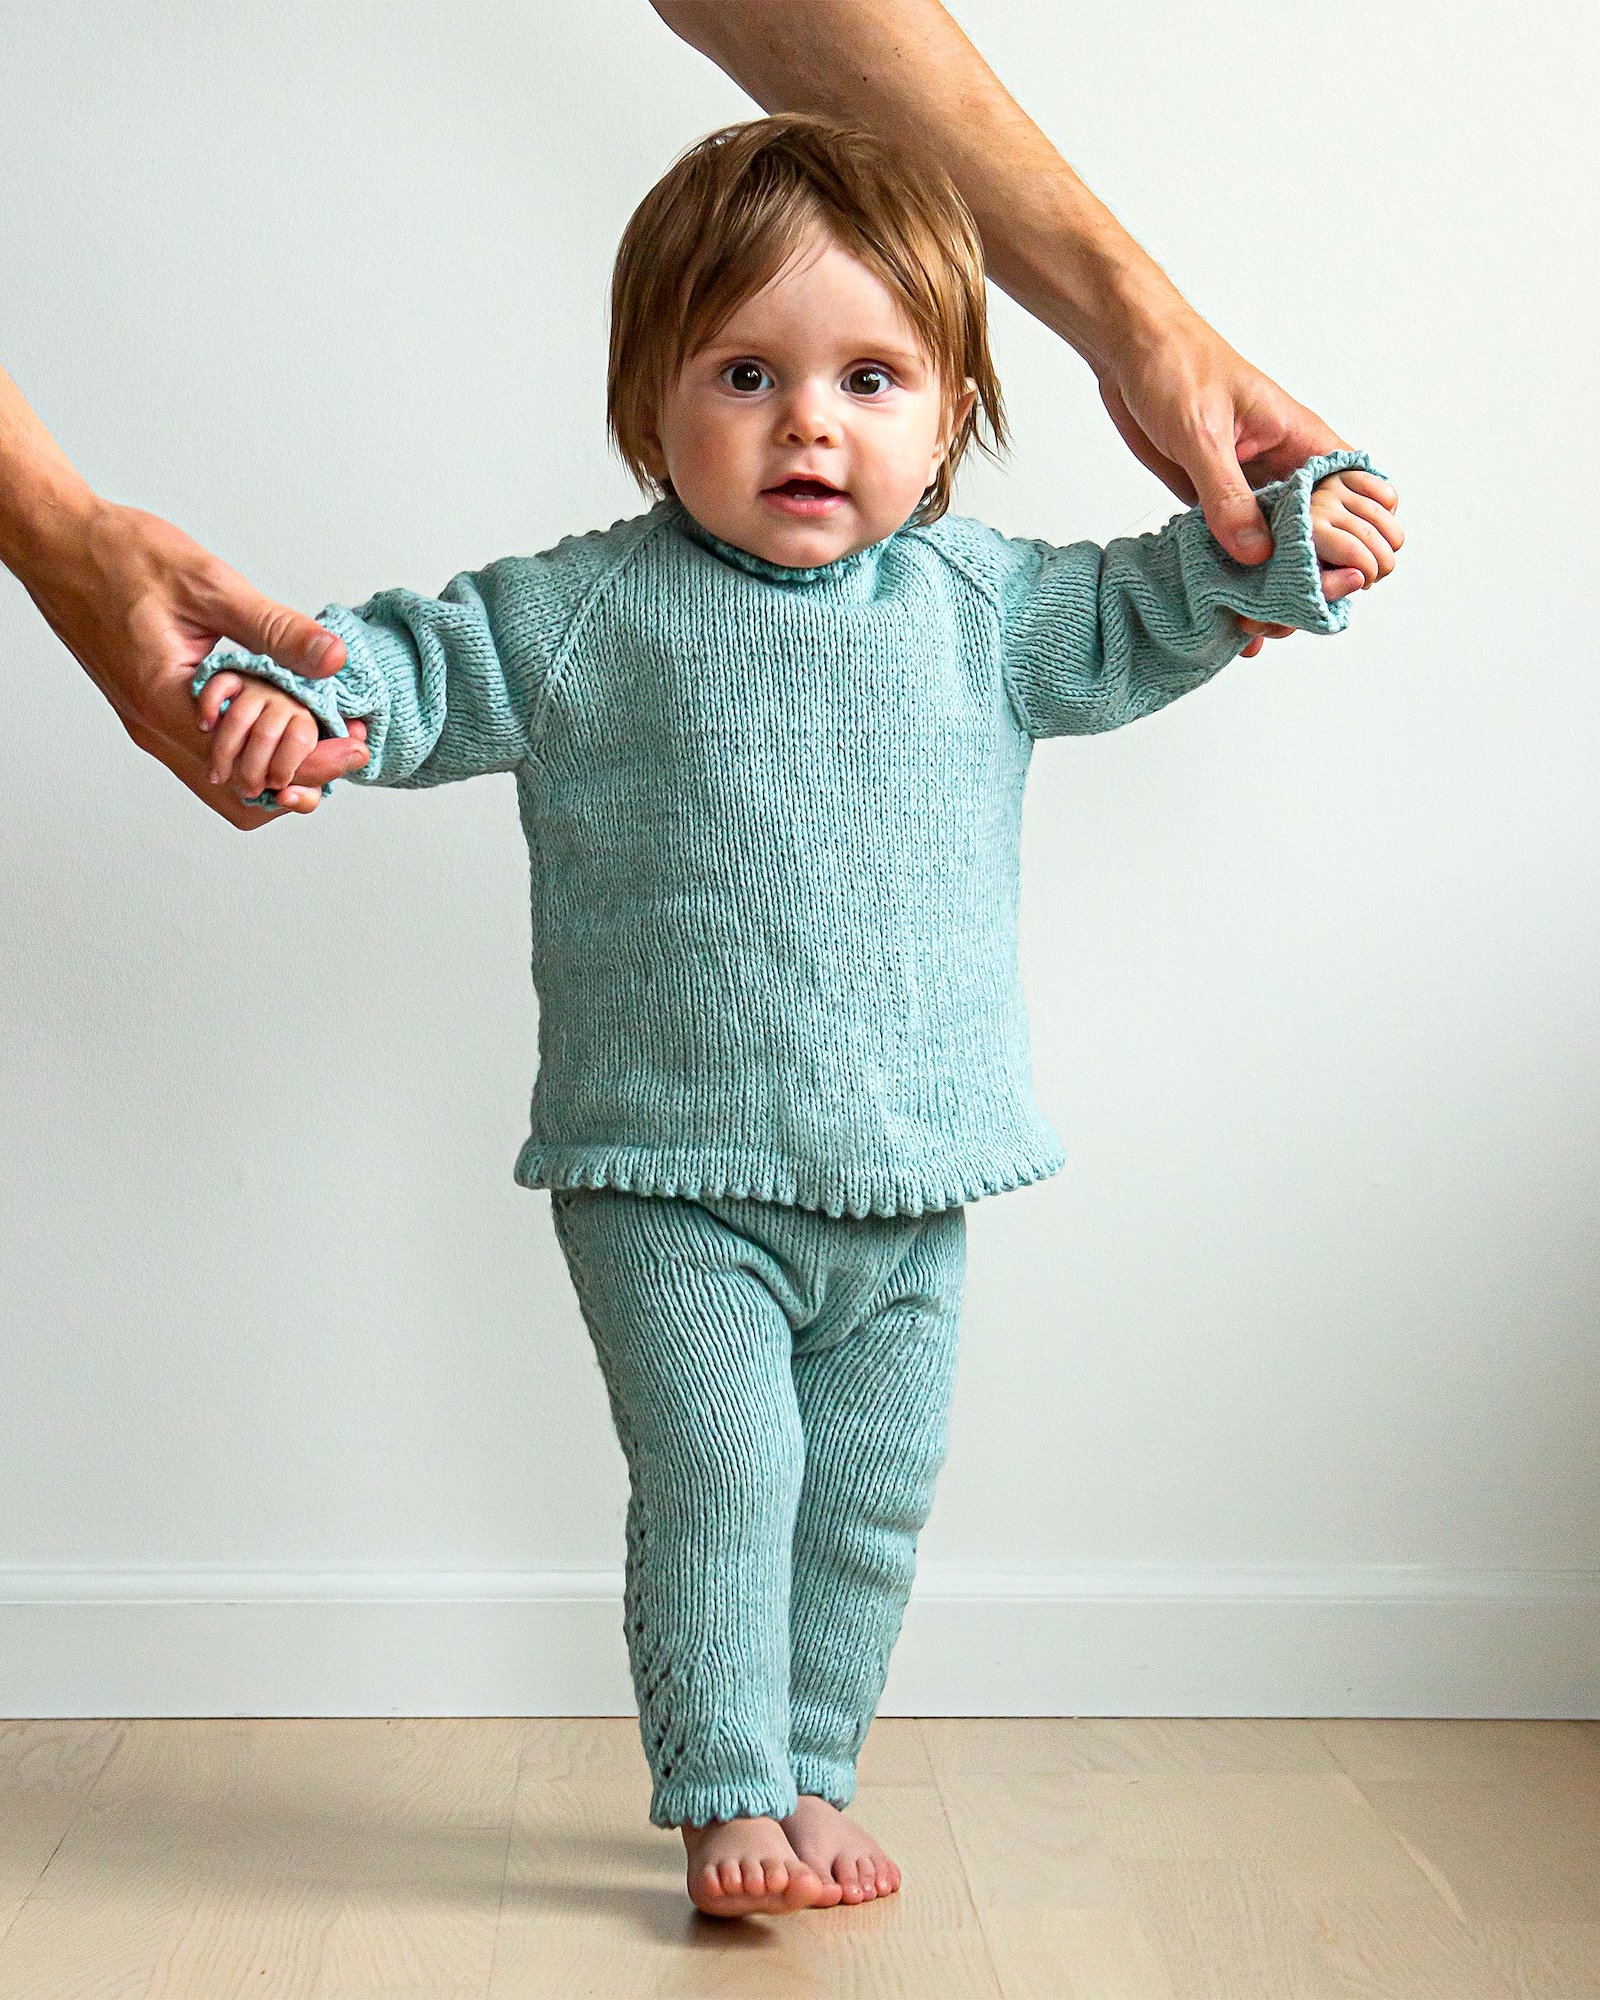 10 Irresistible Baby Patterns With Our New Baby Yarn!